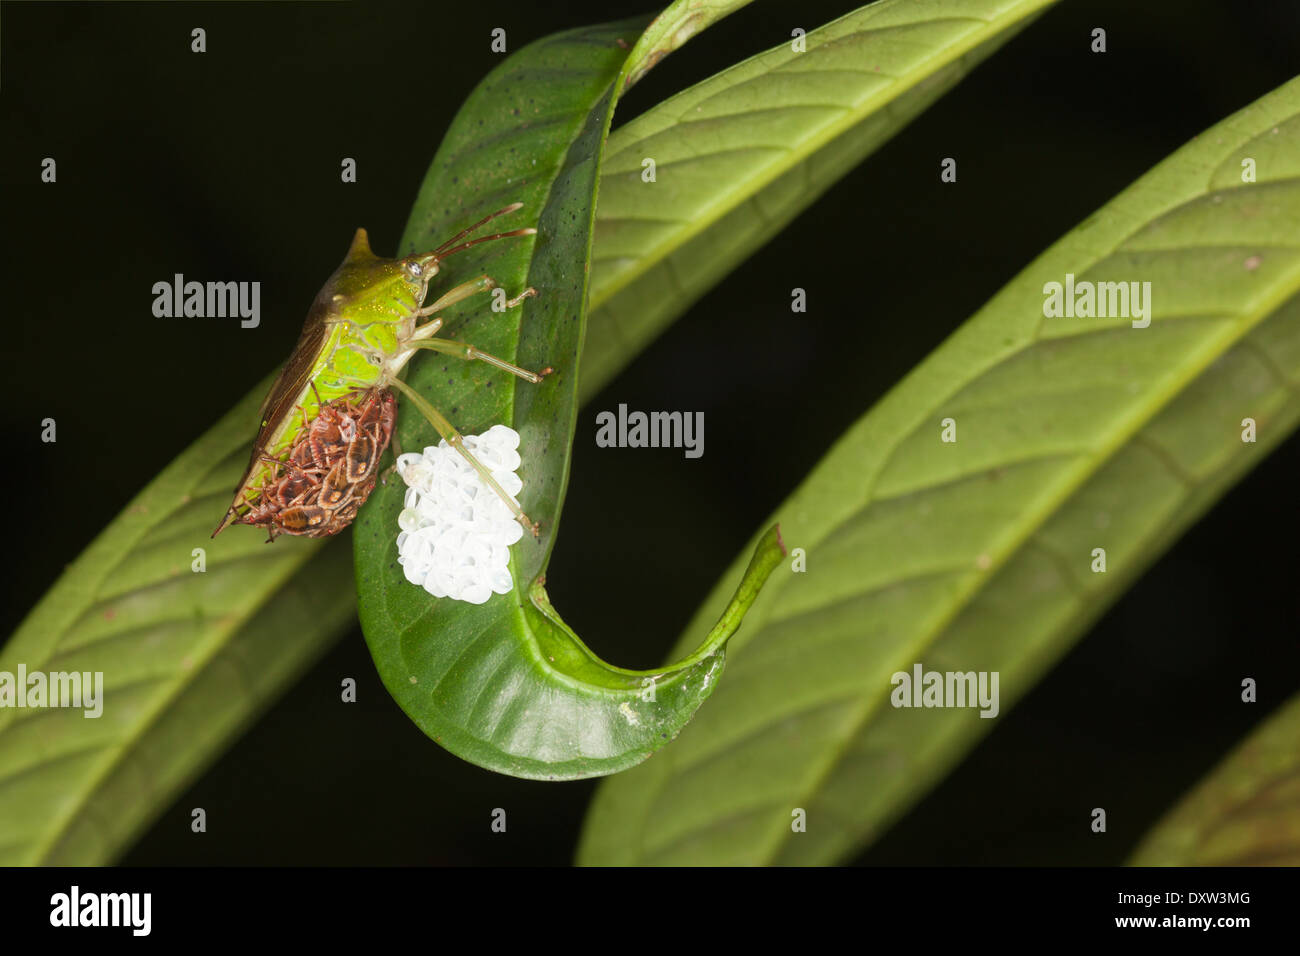 Stink Bug (Pentatomidae) with hatchlings and egg cases in natural habitat on rainforest leaf at night in Borneo Stock Photo